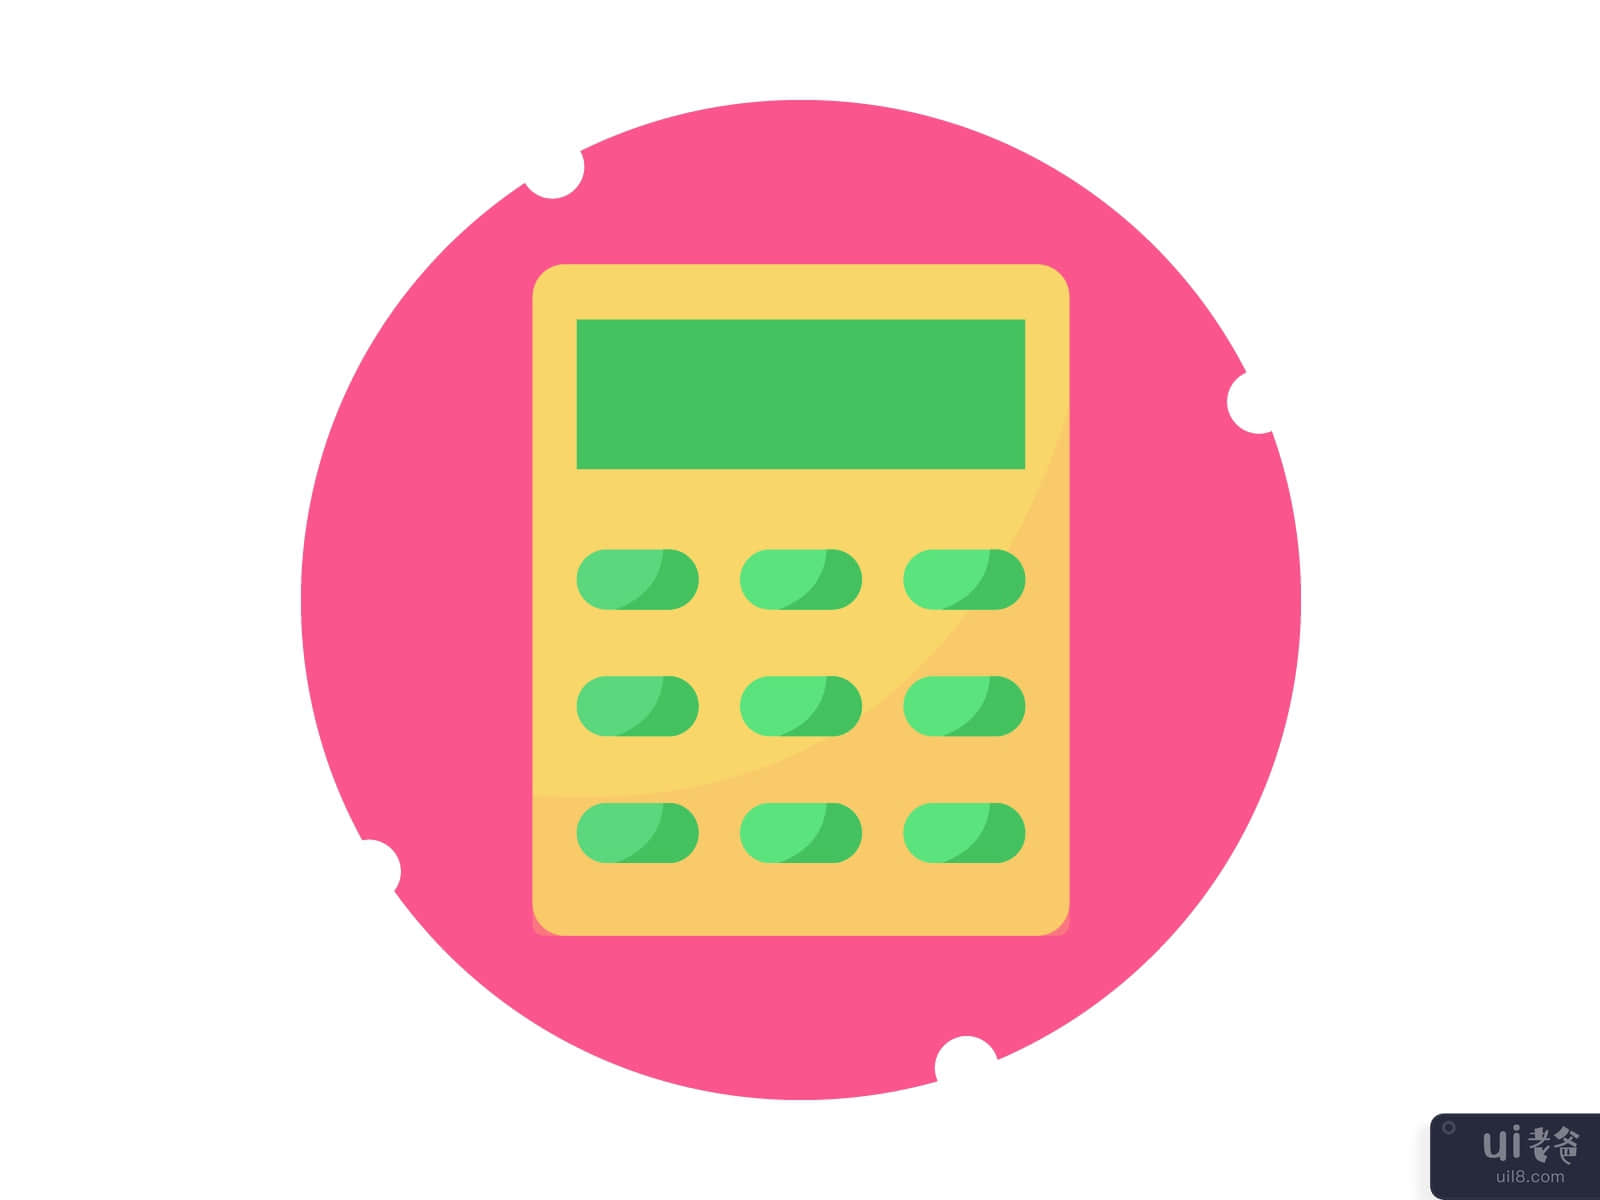 Business calculator with flat style